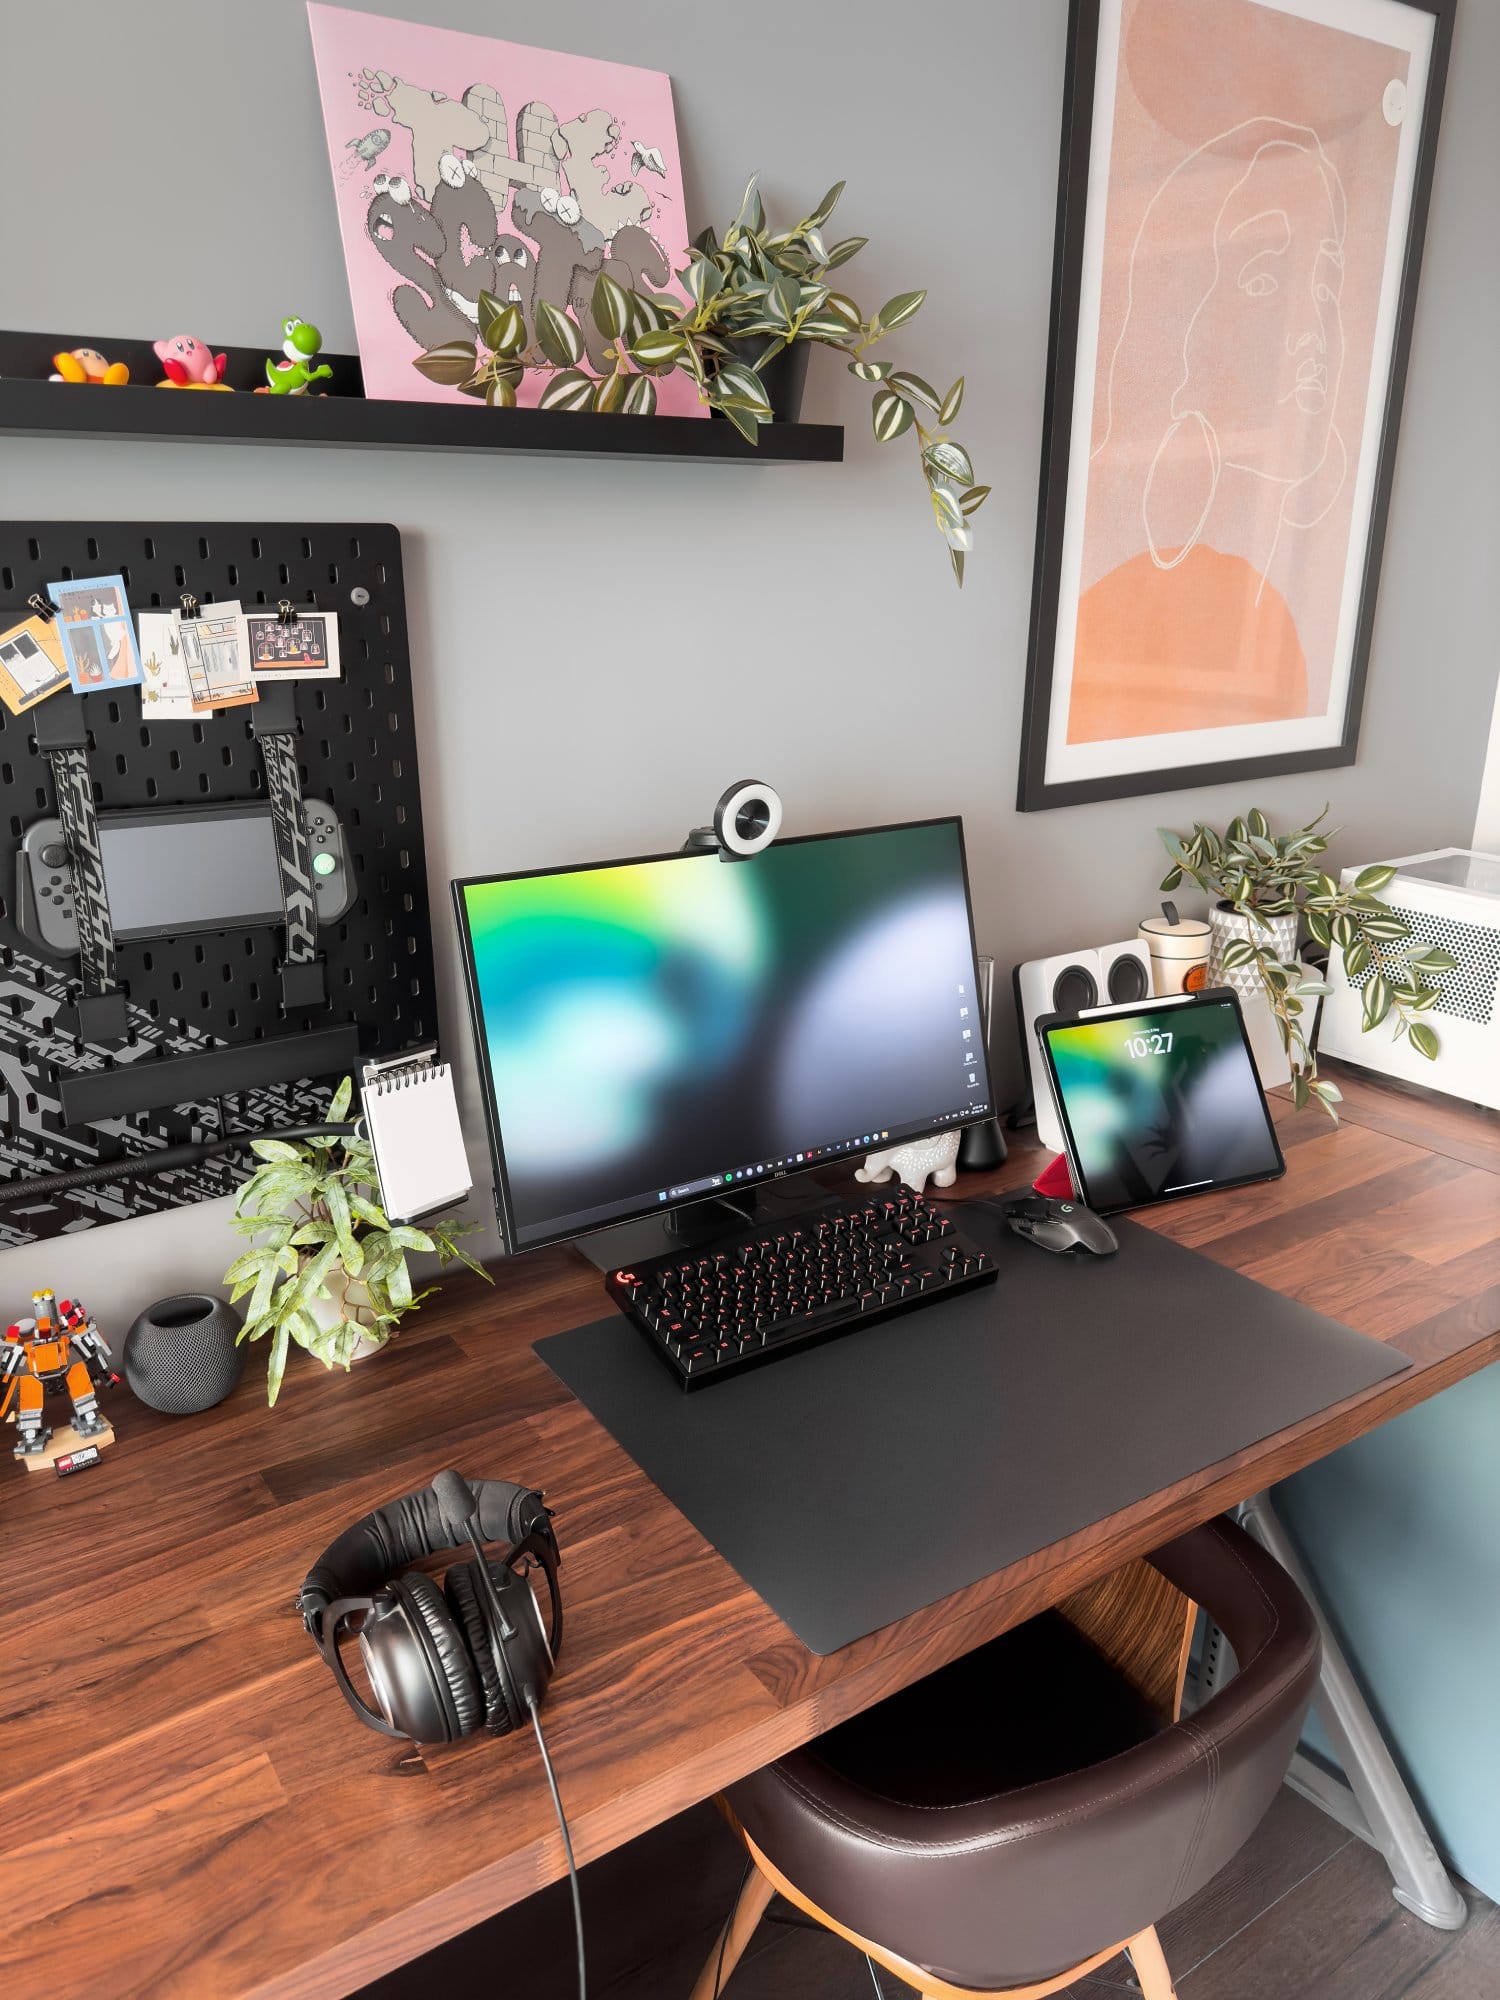 A home office setup with a Dell monitor and Razer Kiyo webcam, Logitech G Pro keyboard and mouse, an iPad Pro 12.9 (3rd Gen), and Logitech G Pro X headphones on a wooden IKEA KARLBY desk, decorated with plants, framed artwork, and an IKEA UPPSPEL pegboard in the background